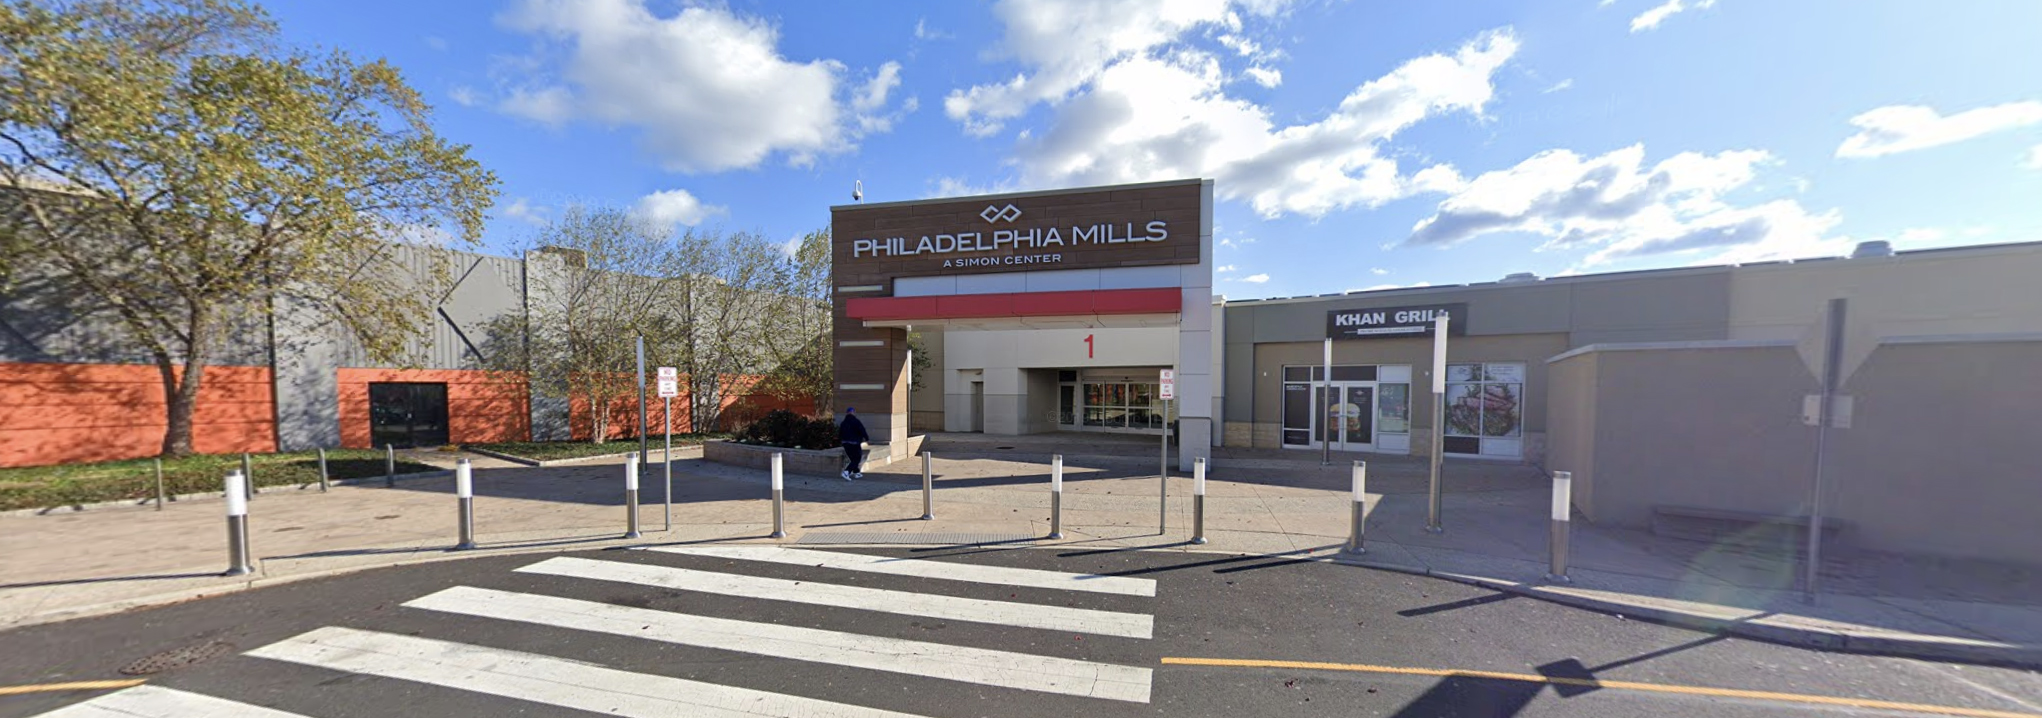 PHOTO: In this screen grab taken from Google Maps Street View, the Philadelphia Mills Mall is shown in Philadelphia.